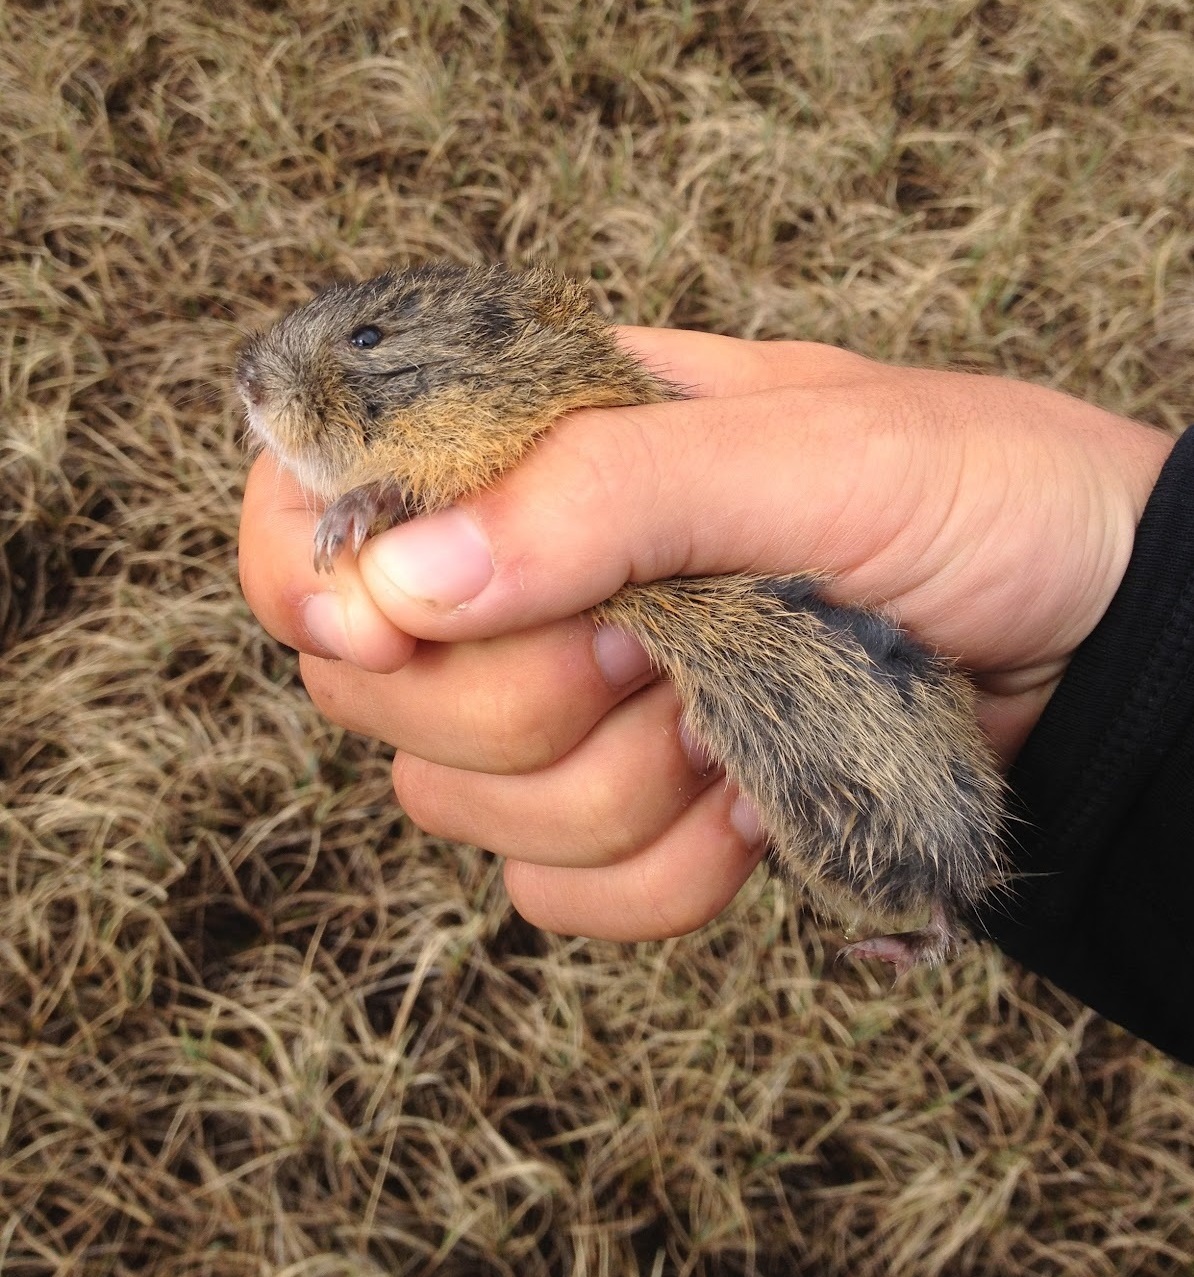 Lemming in human hand